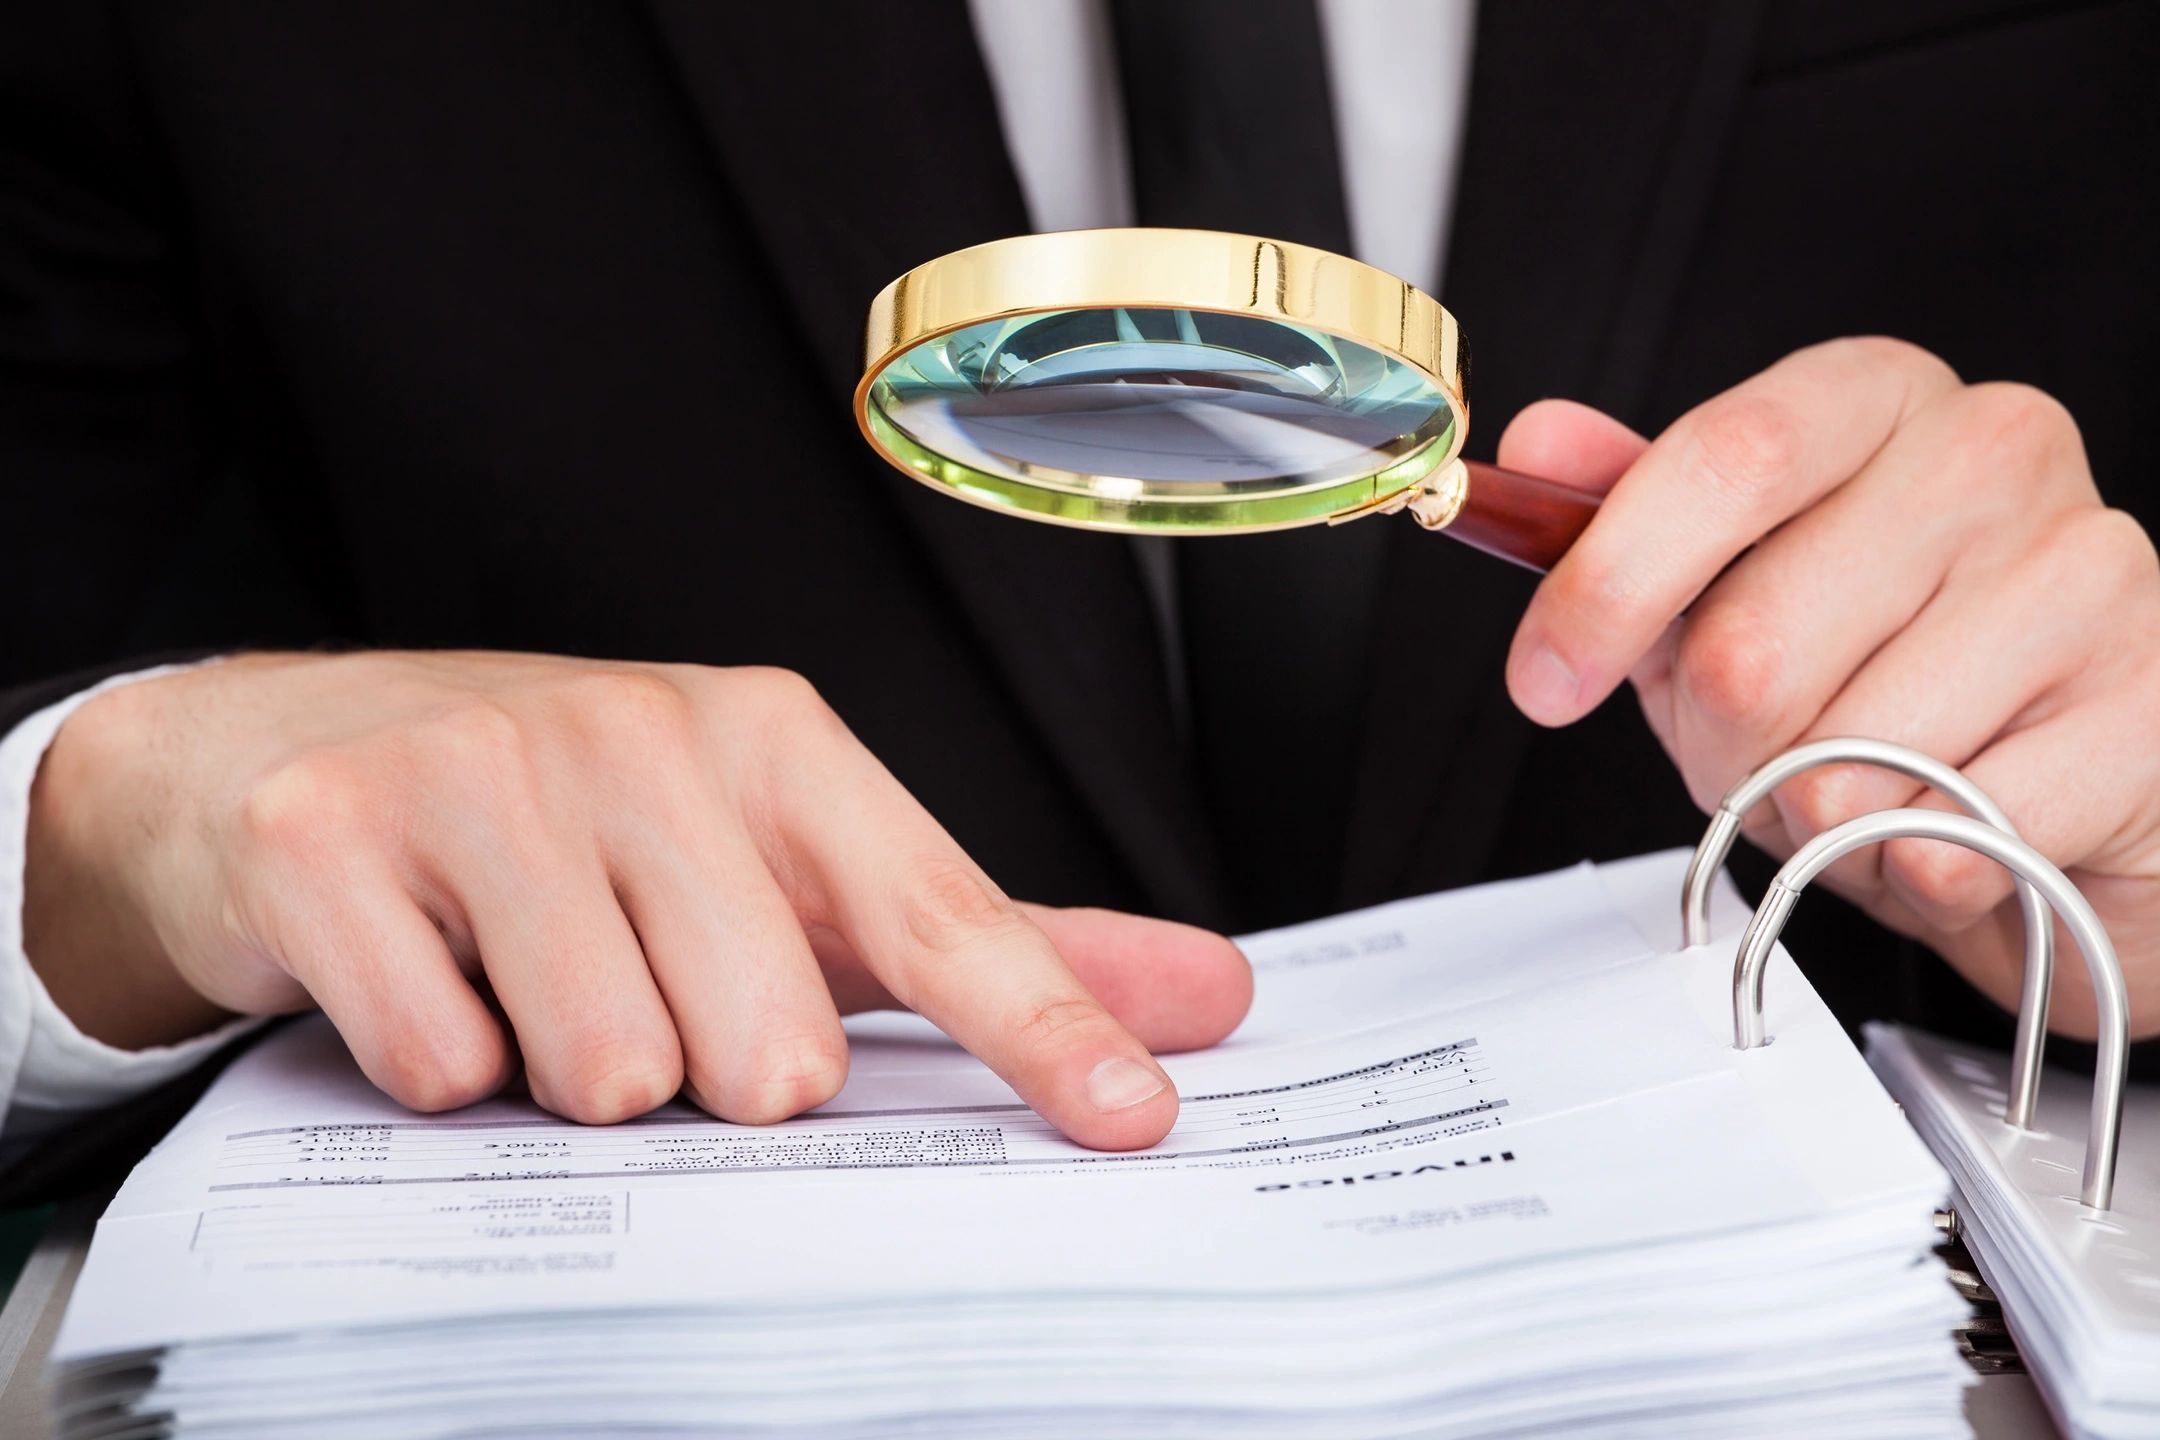 Why should you hire a private investigator?